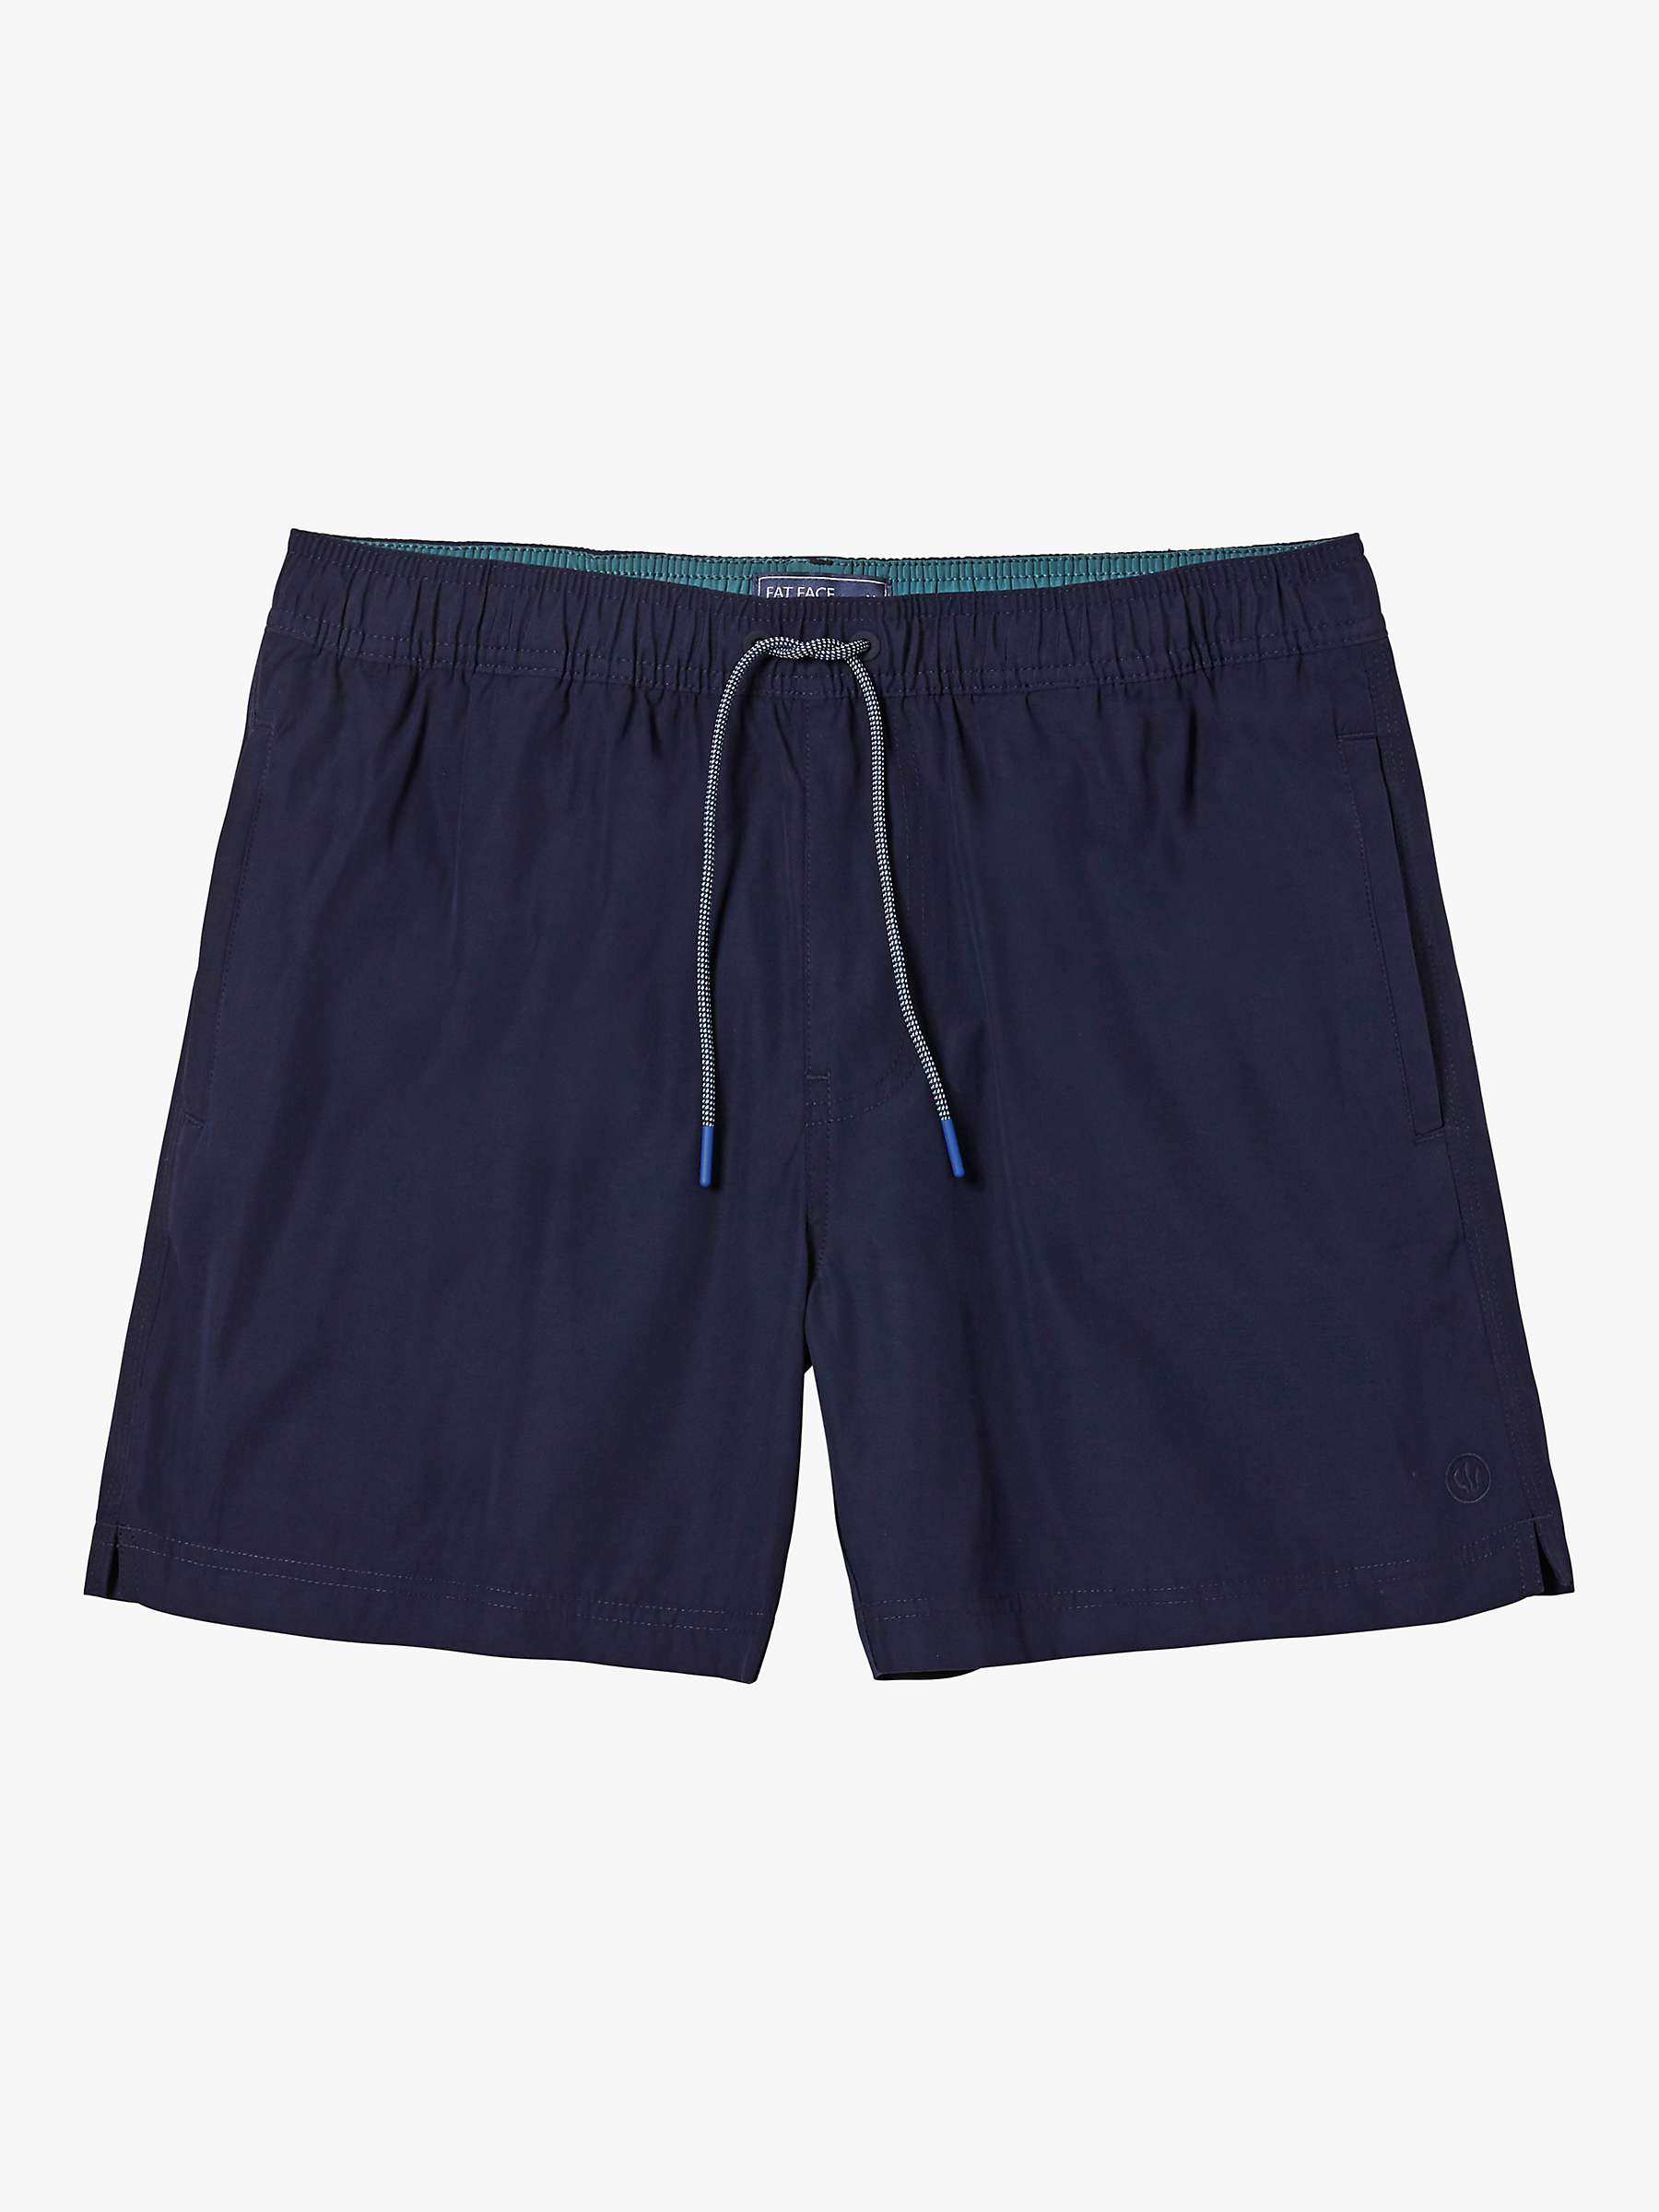 Buy FatFace Montrose Swimming Shorts Online at johnlewis.com